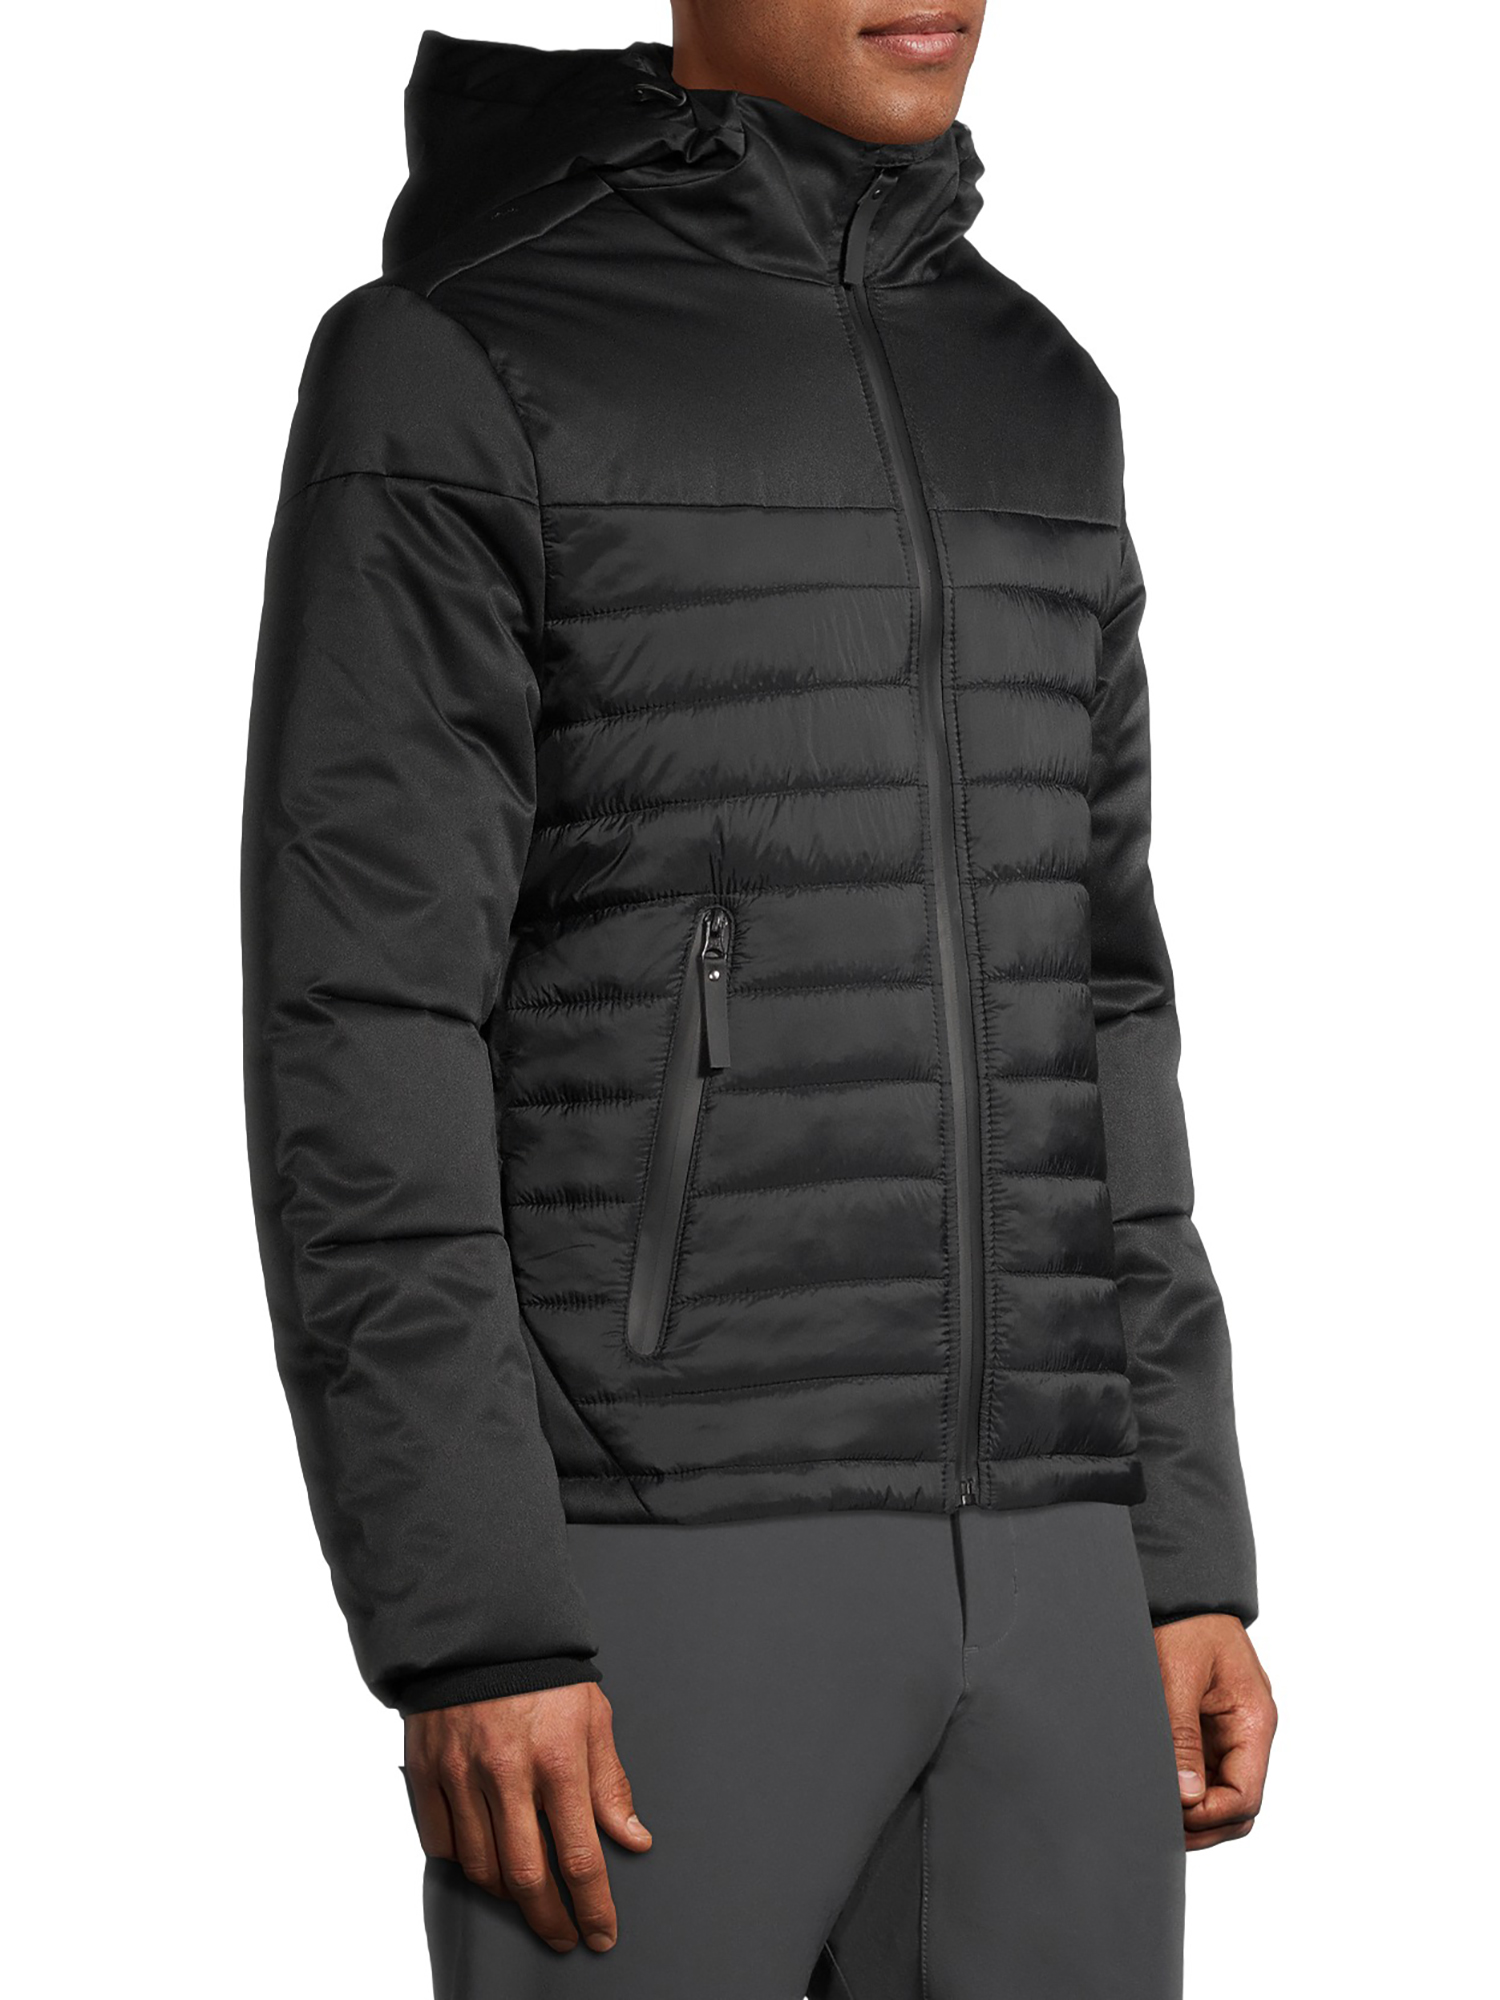 Swiss Tech Men's Hooded Softshell Quilted Mixed Media Jacket - image 3 of 7